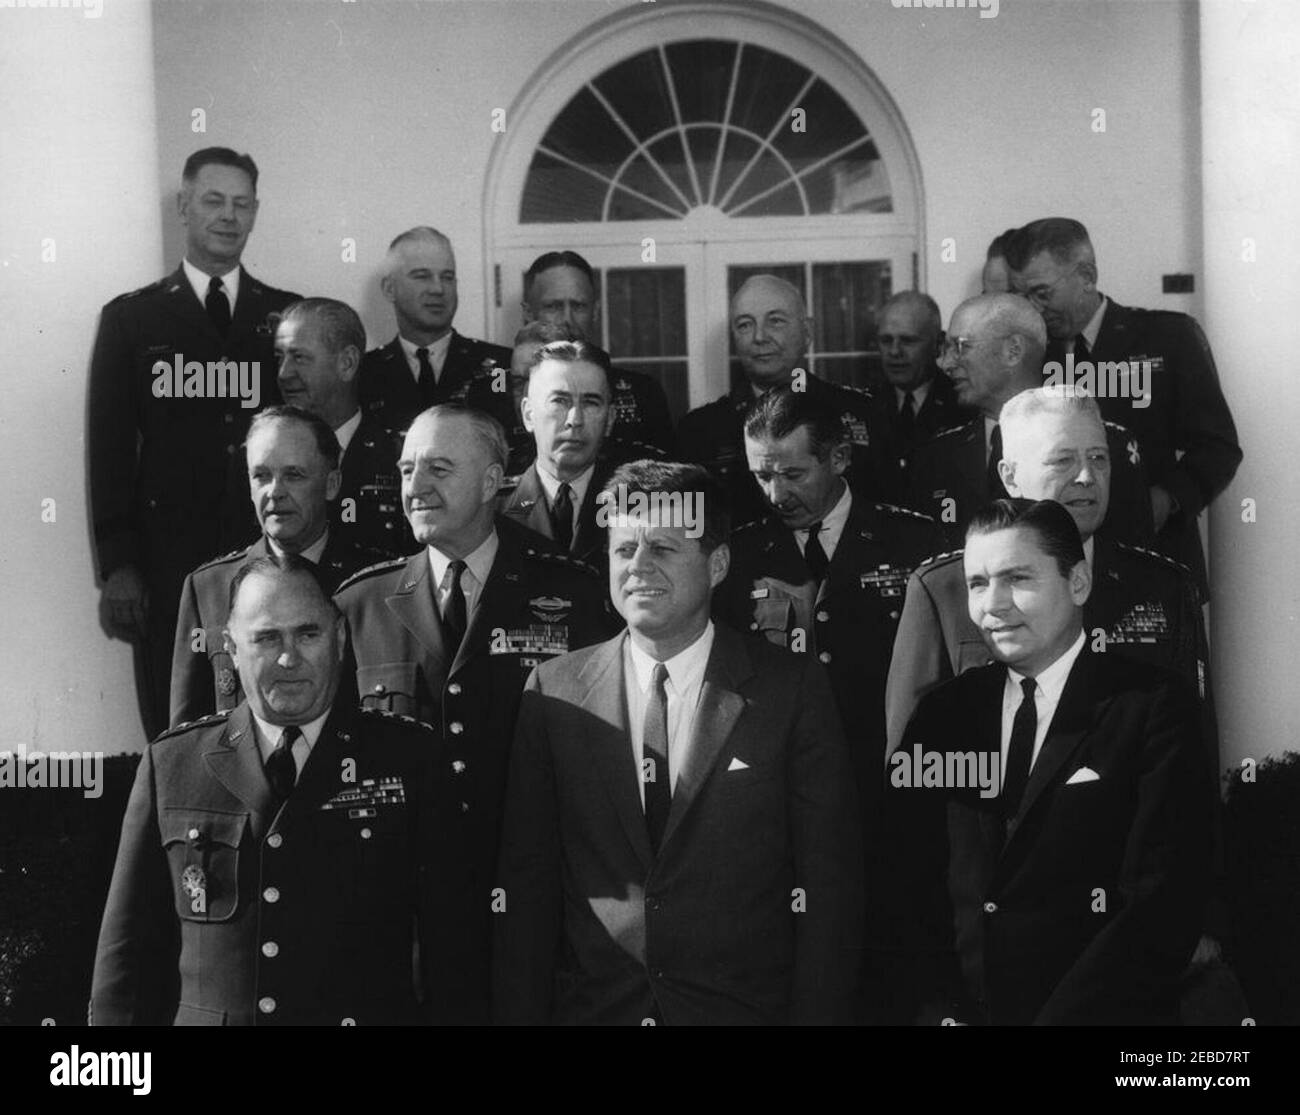 Visit of Army commanders, 12:15PM. President John F. Kennedy visits with United States Army Commanders. Standing in the first row (L-R): Chief of Staff of the United States Army General George H. Decker; President Kennedy; and Elvis Stahr, Secretary of the Army. Second row (L-R): General Herbert B. Powell; General Bruce C. Clarke. Third row (L-R): Lieutenant General Emerson L. Cummings; Lieutenant General Donald P. Booth; General James F. Collins. Back rows (L-R): Major General Theodore F. Bogart; General Clyde D. Eddleman; Major General John H. Michaelis; Lieutenant General Edward J. Ou2019N Stock Photo